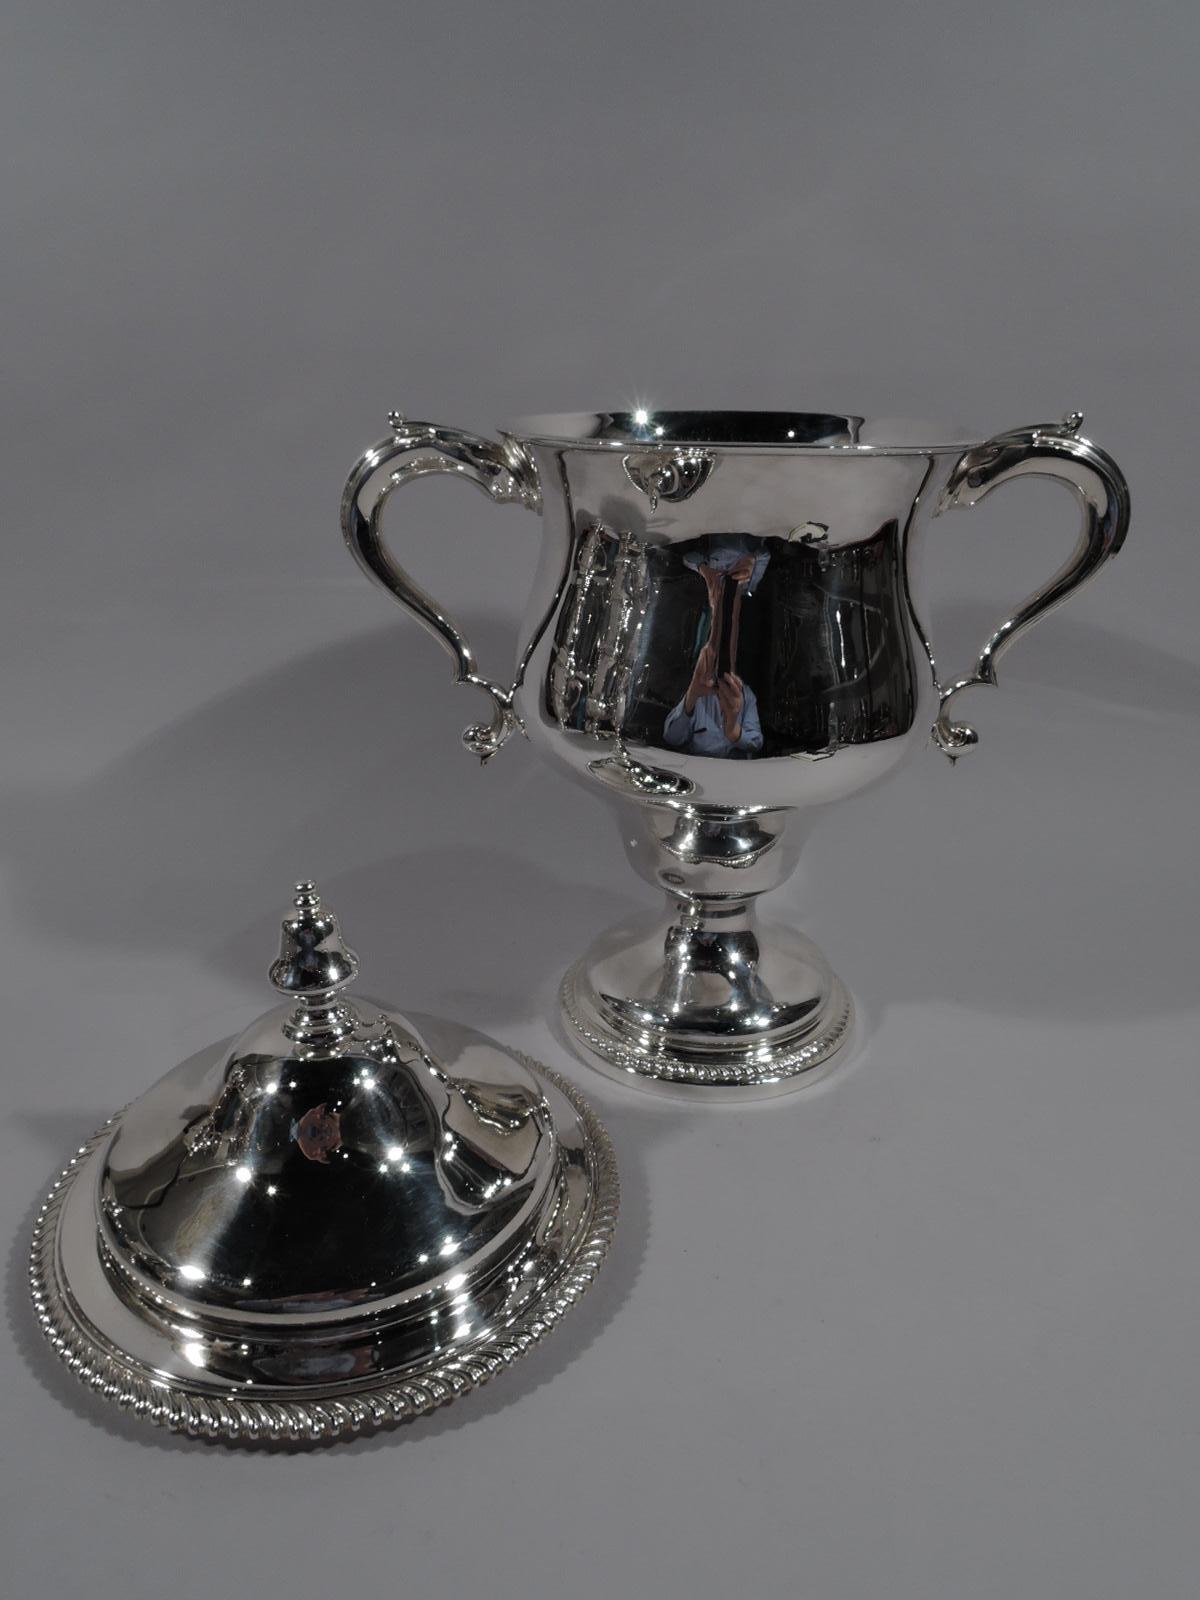 Edwardian sterling silver Classical covered urn. Made by Martin, Hall & Co. Ltd in Sheffield in 1904. Deep and wide-bodied baluster with leaf-capped double-scroll side handles and domed foot. Cover domed with acorn finial. Gadrooned rims.